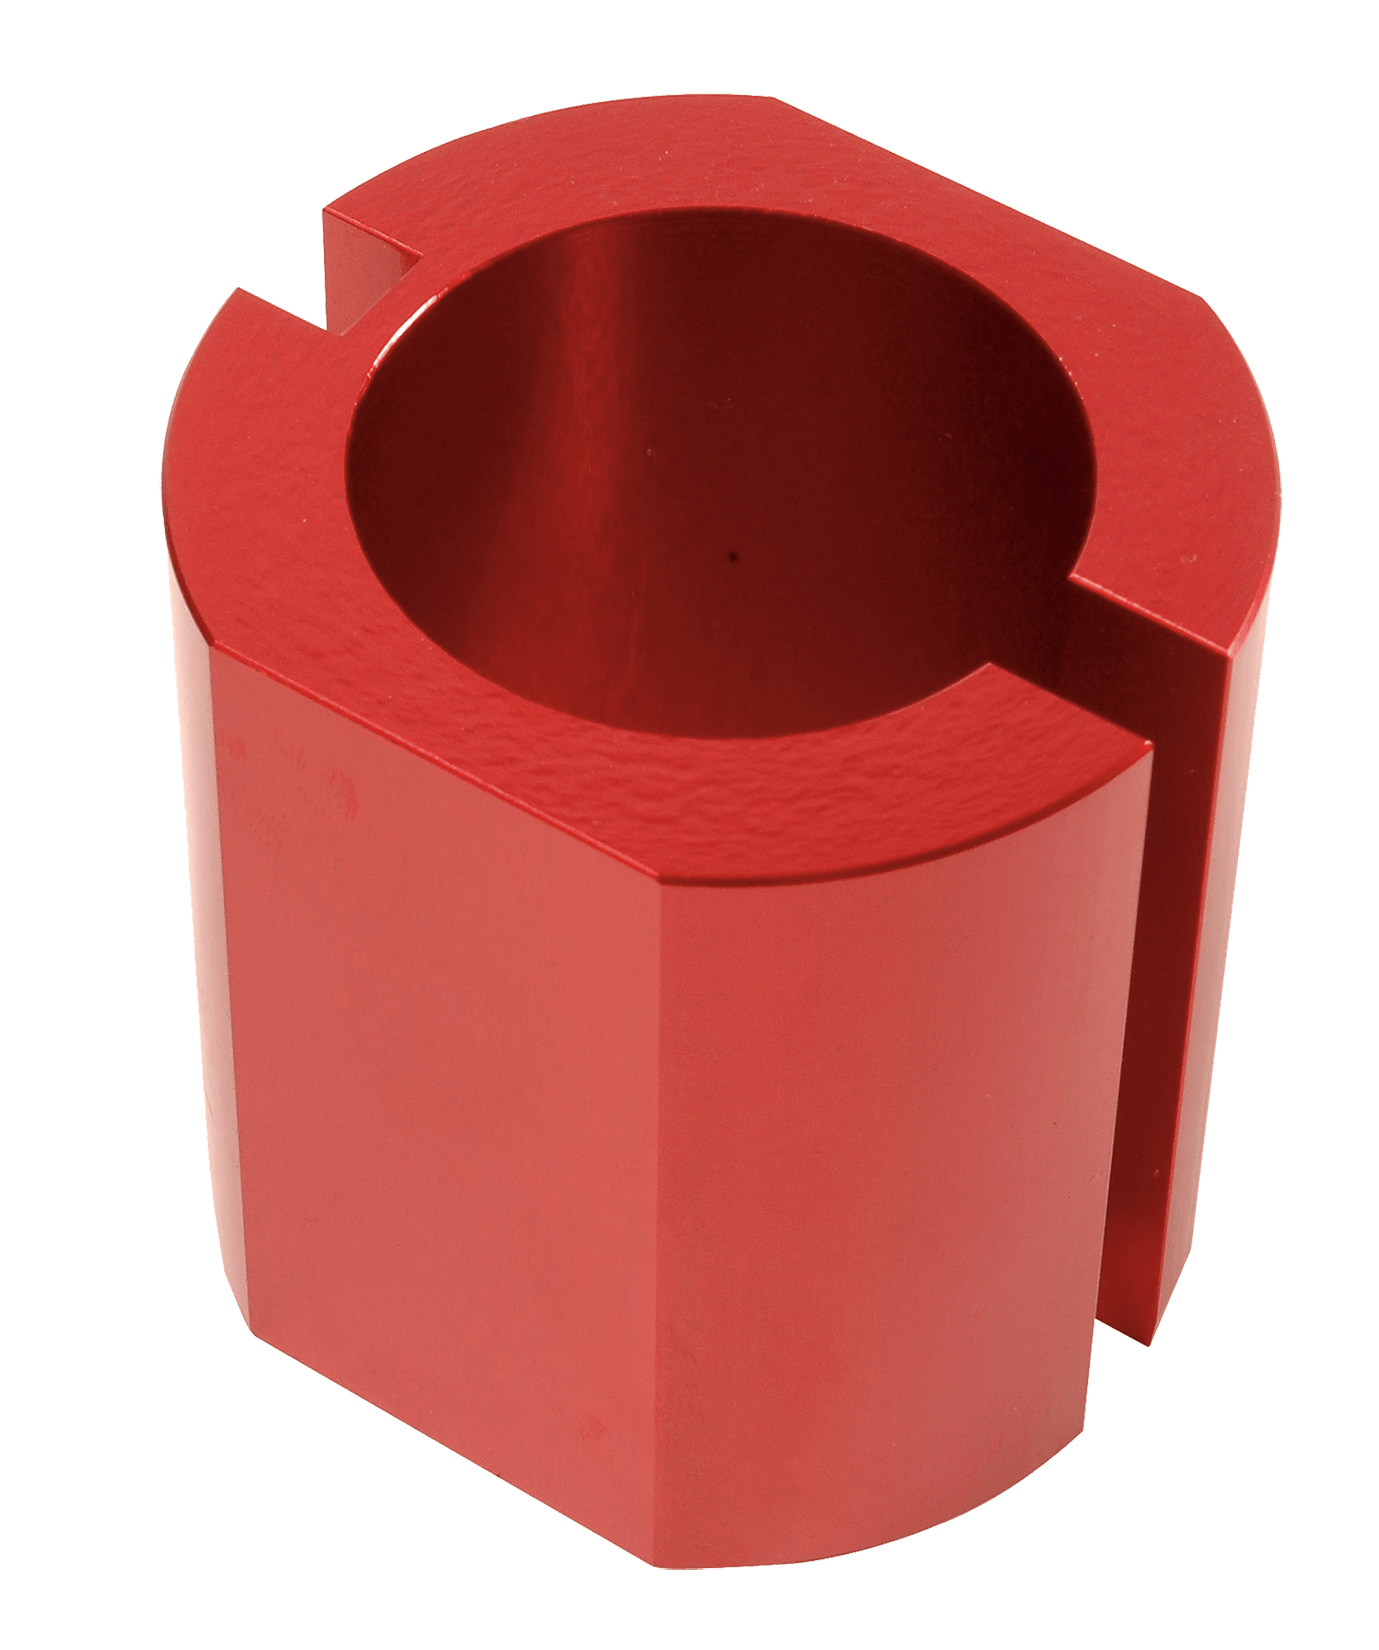 QA1 7791-143 Tool, Monotube Body Clamp, Anodized 46 mm, Red Anodized